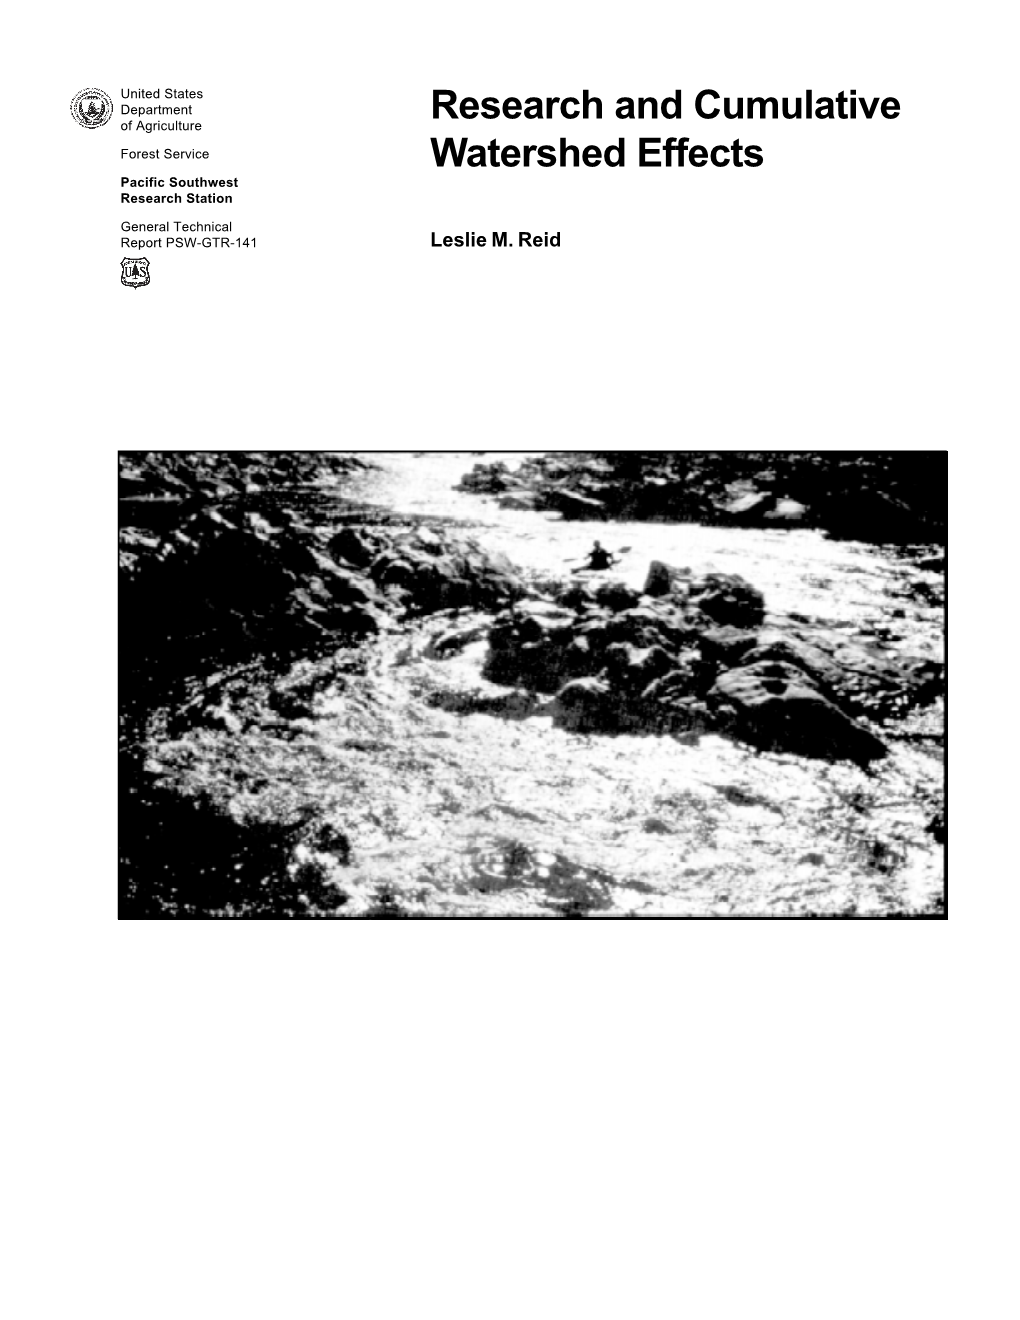 Gtr-141, Research and Cumulative Watershed Effects